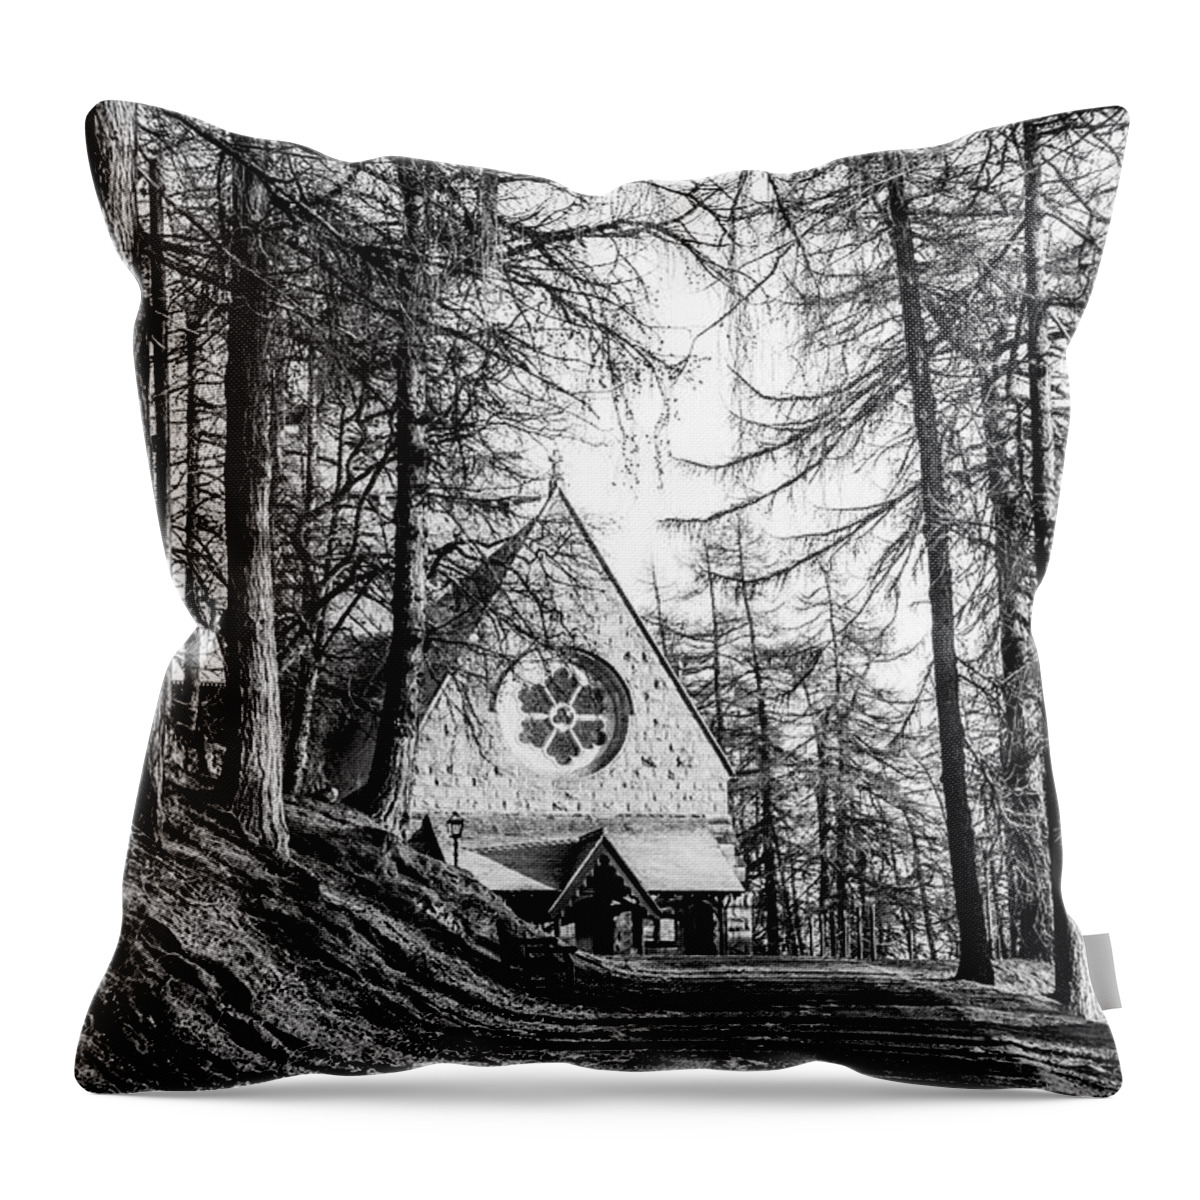 Aberdeenshire Throw Pillow featuring the photograph Crathie Church Landscape by Tanya C Smith